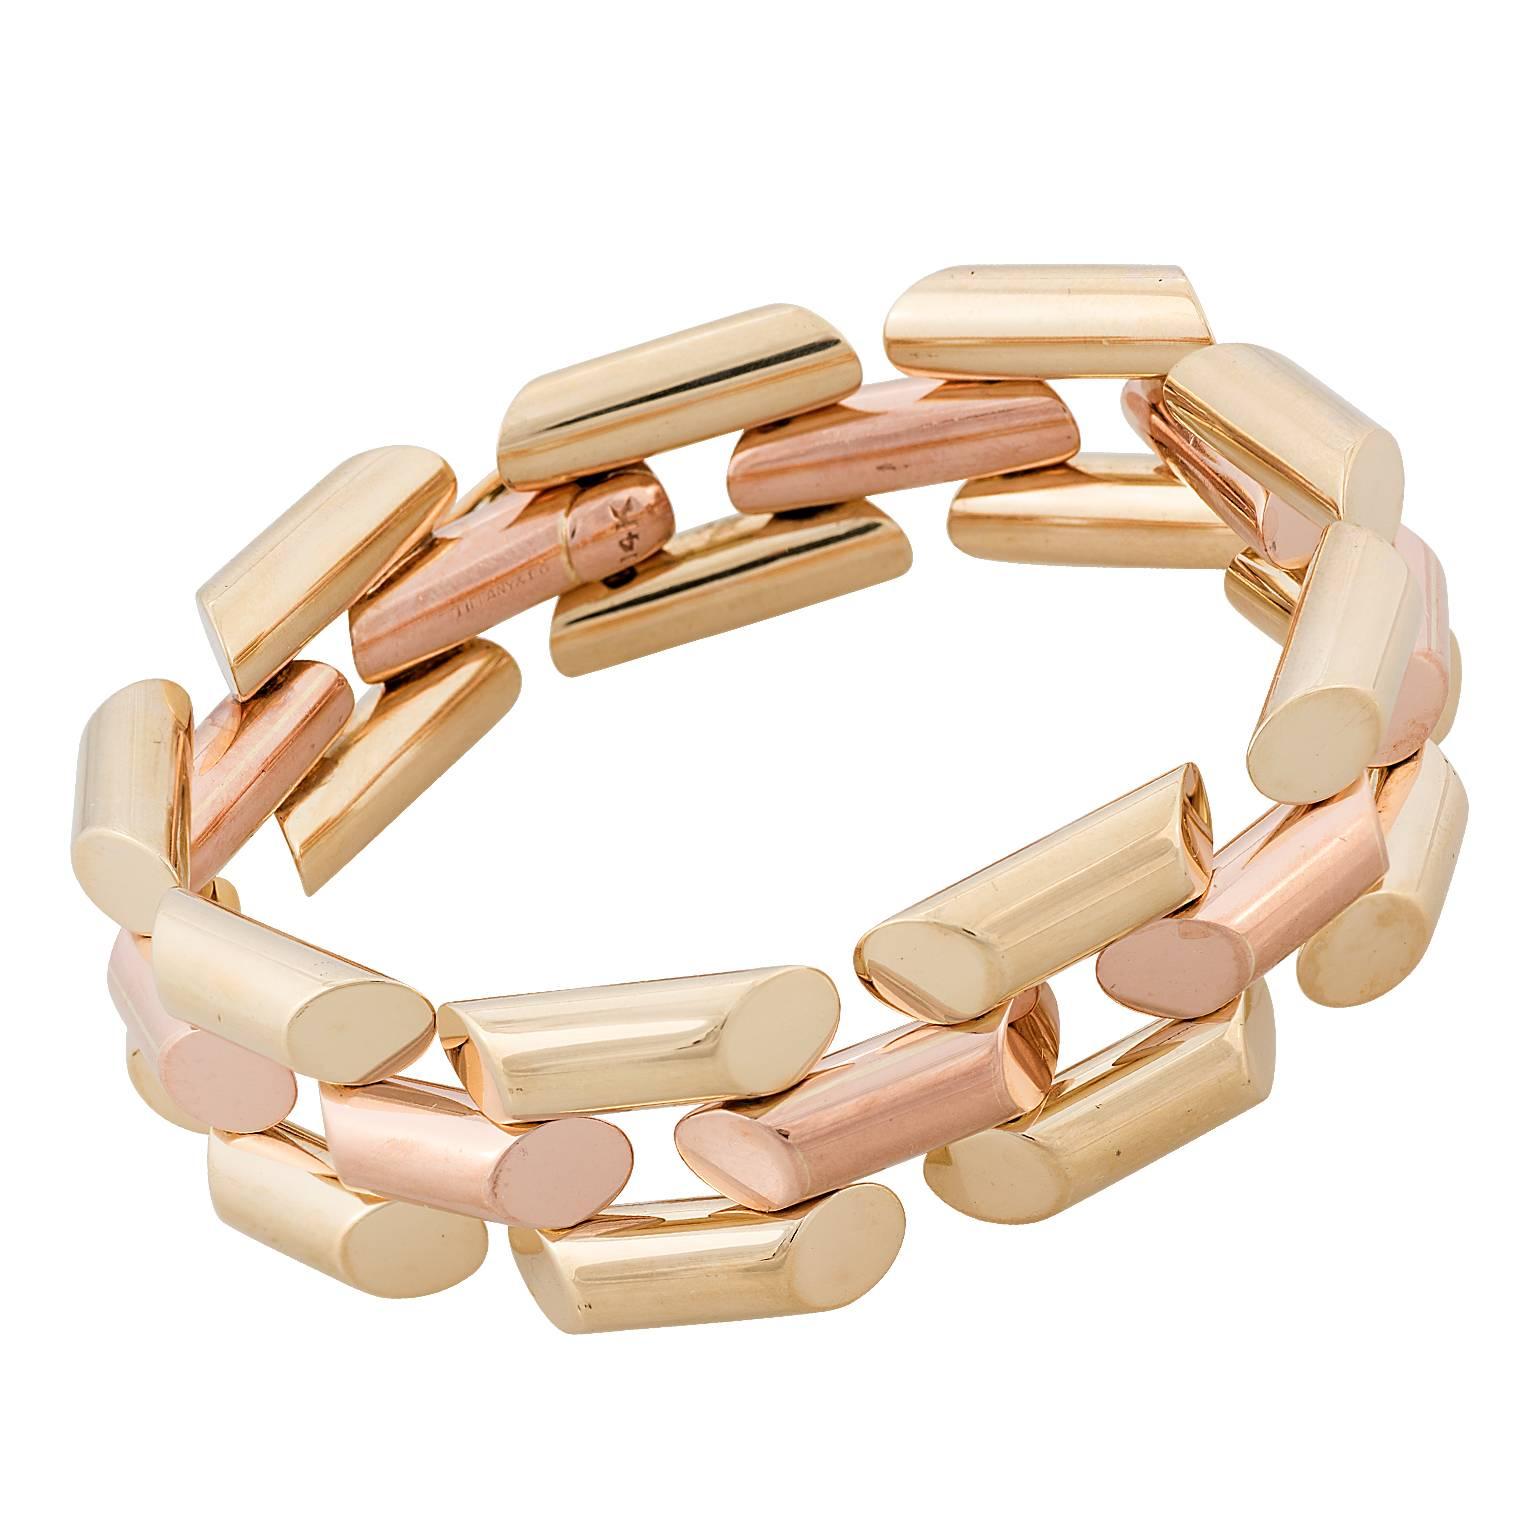 Tiffany & Co. 14 karat rose and yellow gold link bracelet.  The bracelet is designed with the center links being rose gold, with yellow gold outside links.
Signed Tiffany & Co.

Hallmark:  14K